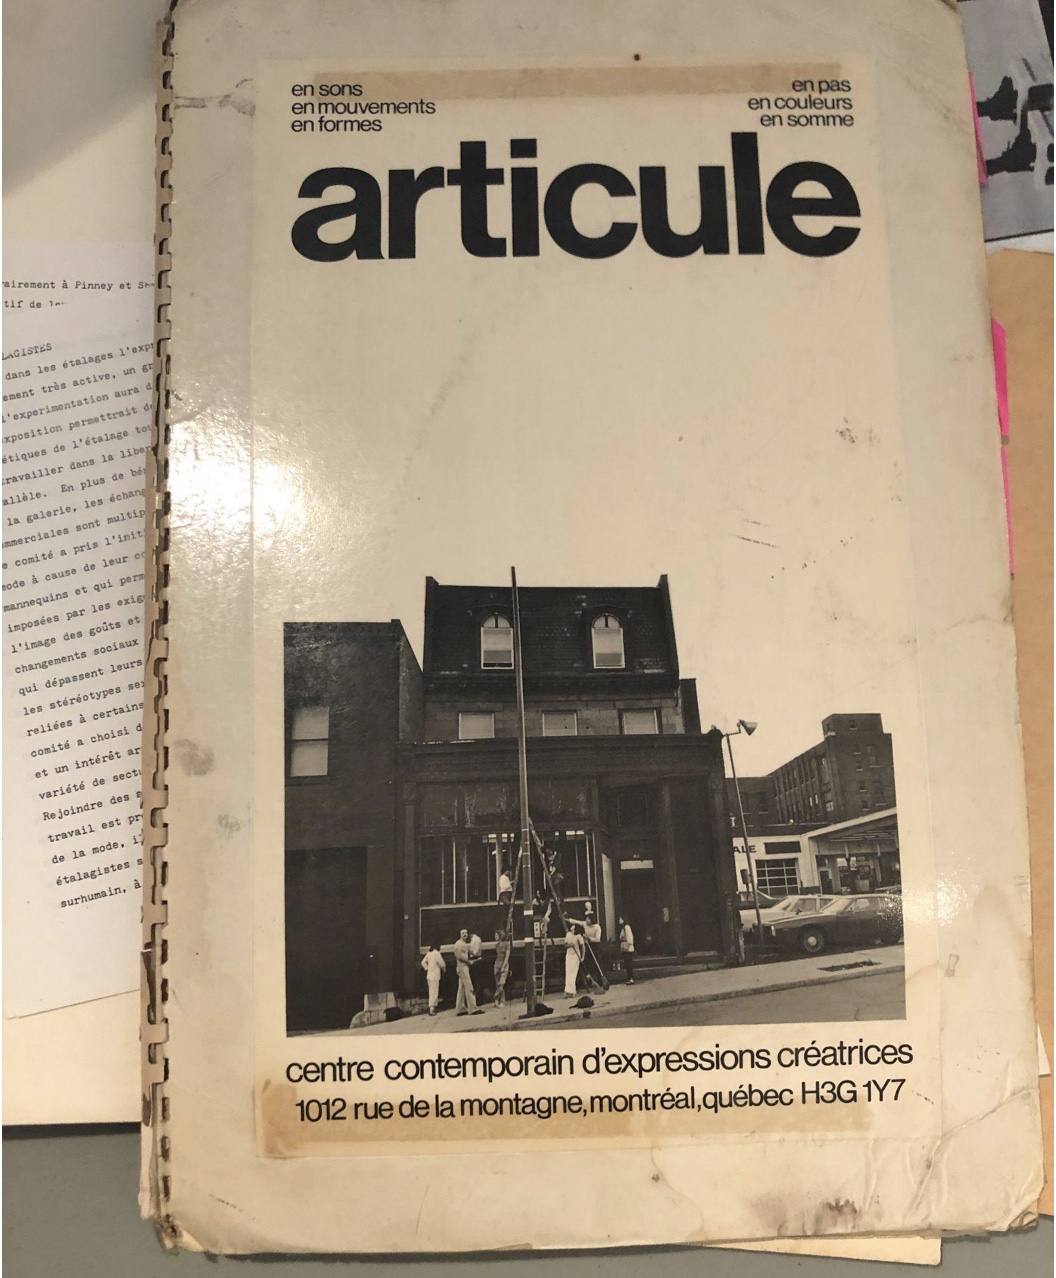 Image of archival documents featuring a catalogue displaying a photograph of the articule original storefront circa 1980 on de la Montagne street in Montreal. Several members stand in front of an erect ladder installing work in front of the large gallery window.